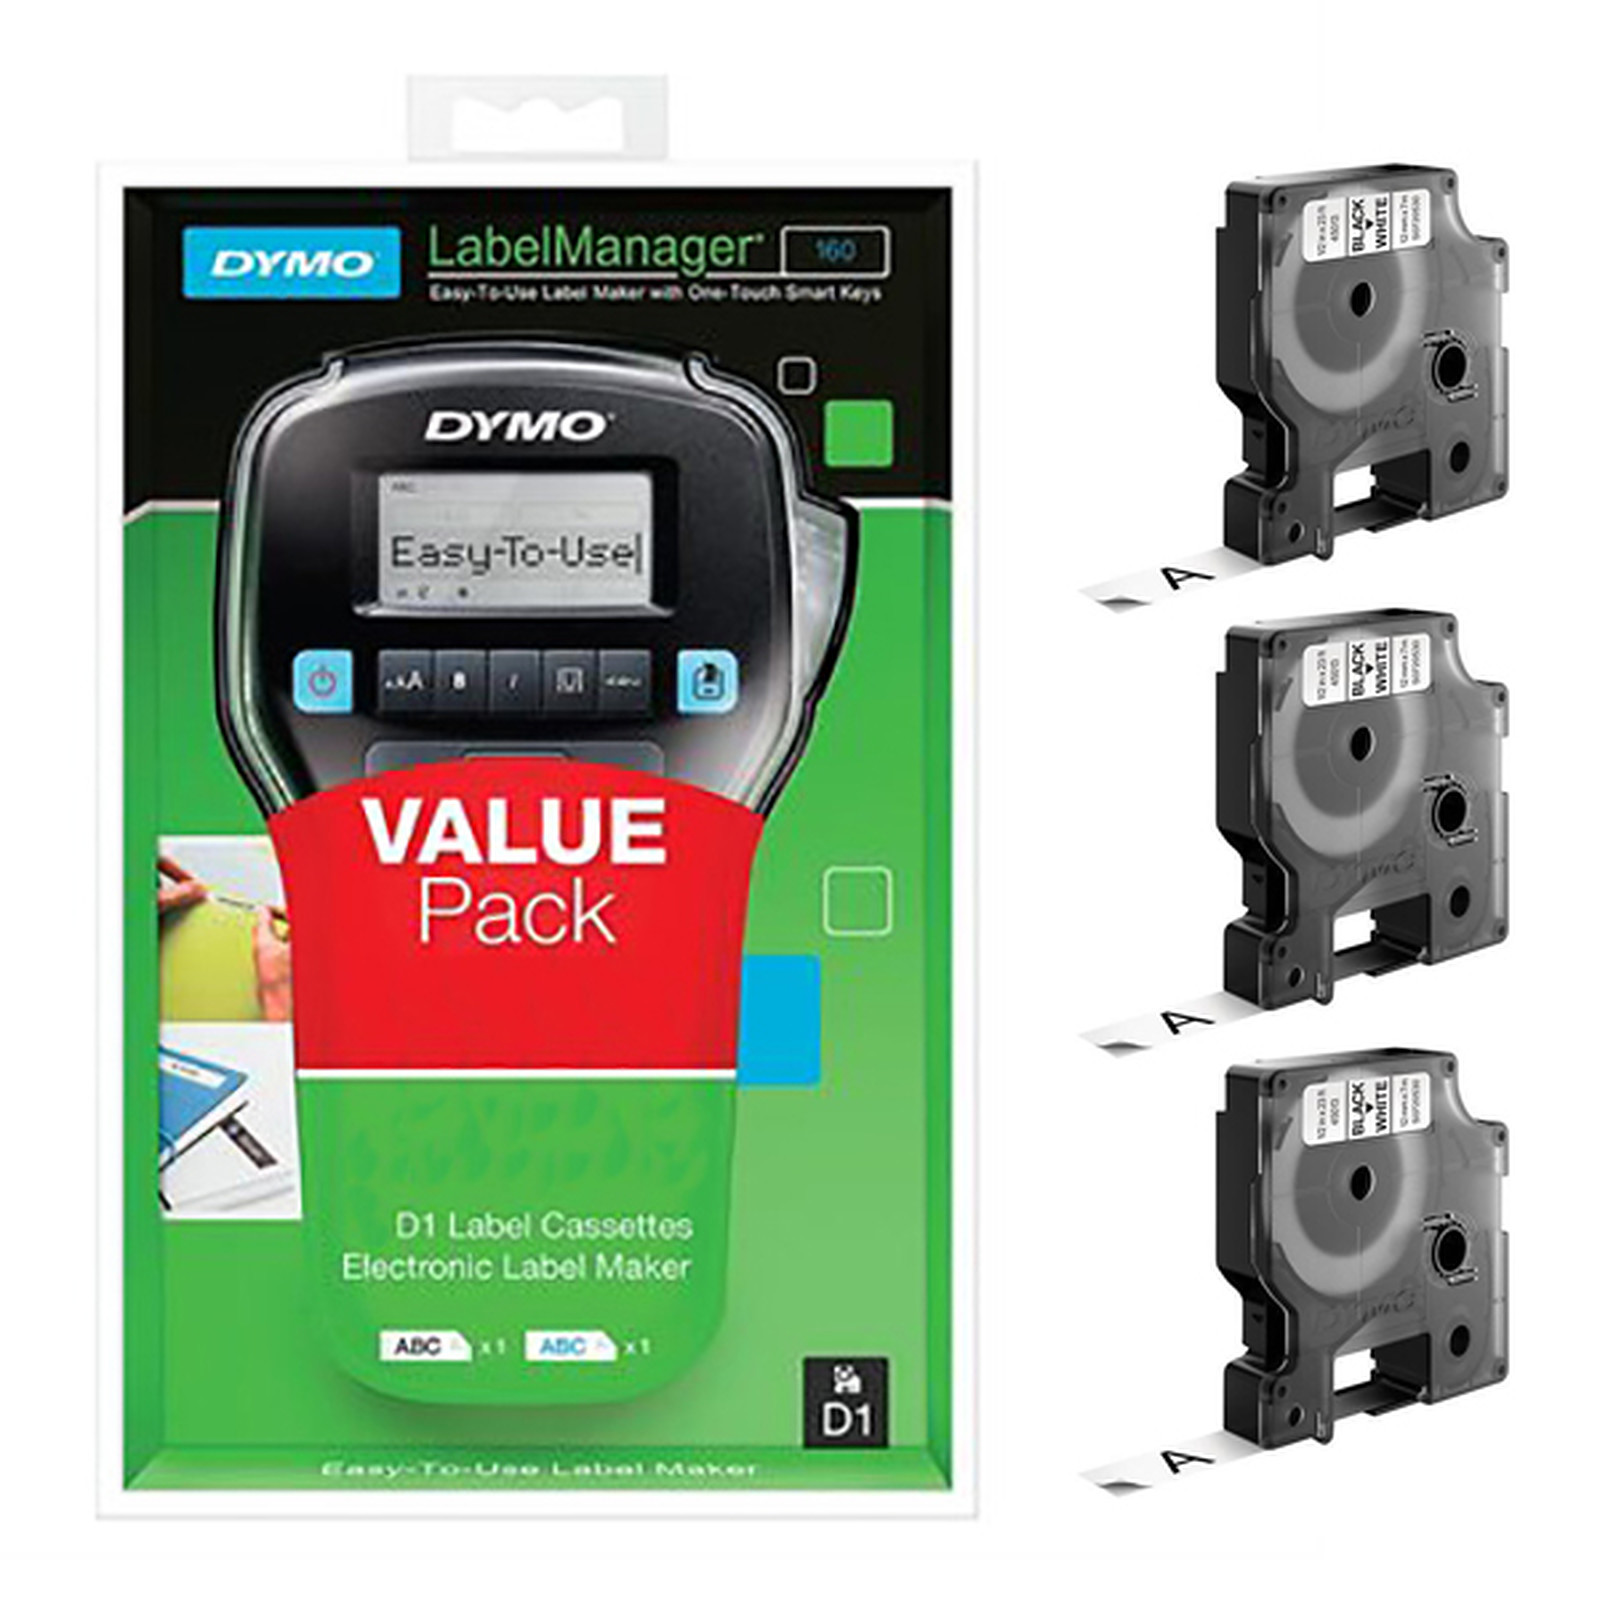 DYMO Value Pack LabelManager 160 - Titreuse DYMO